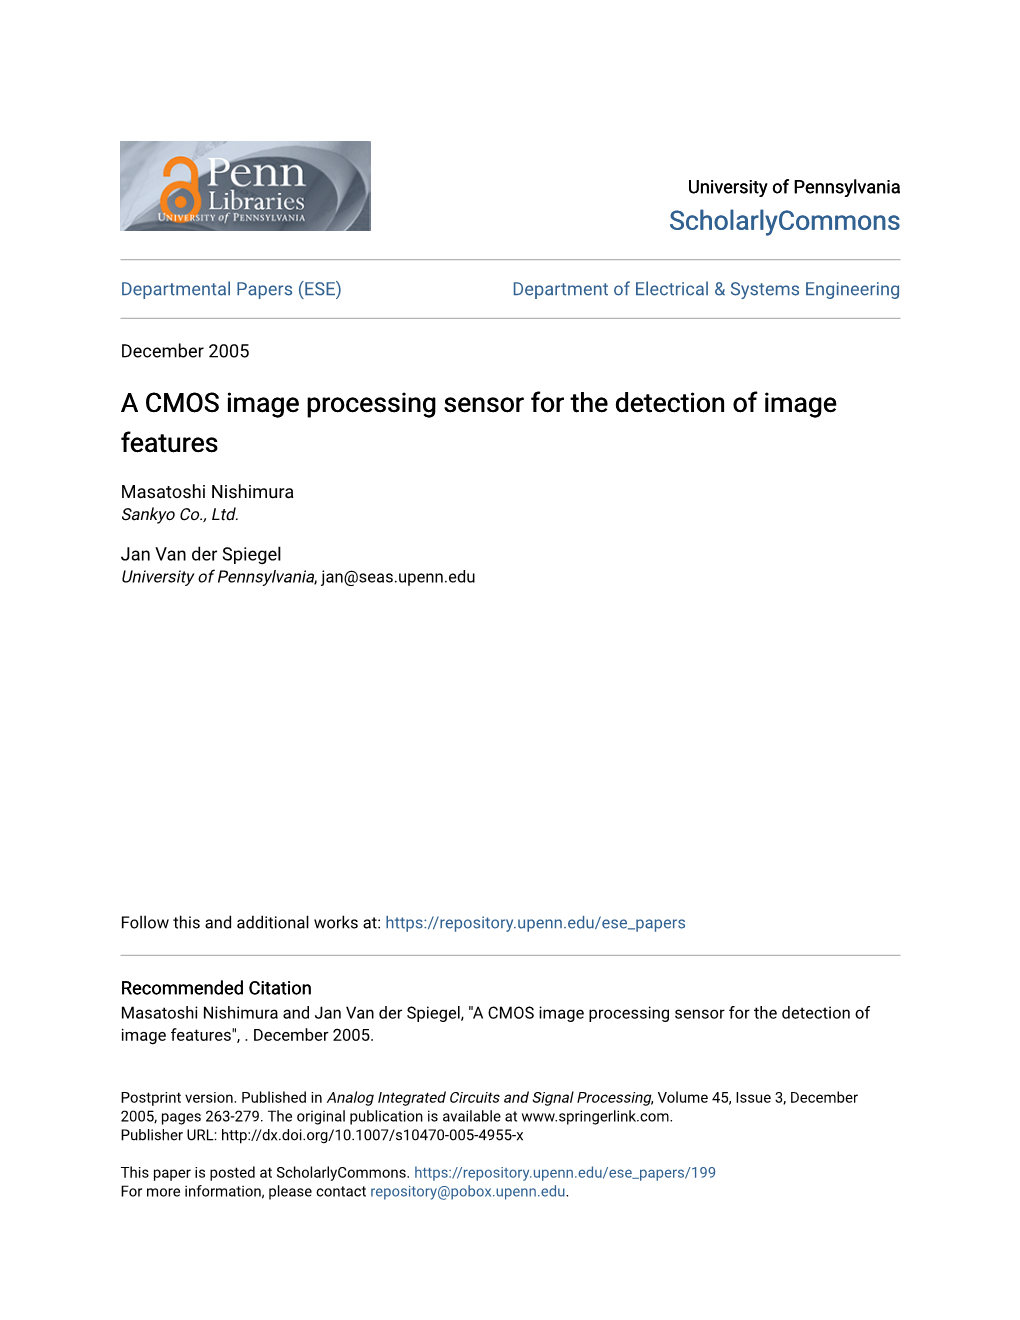 A CMOS Image Processing Sensor for the Detection of Image Features